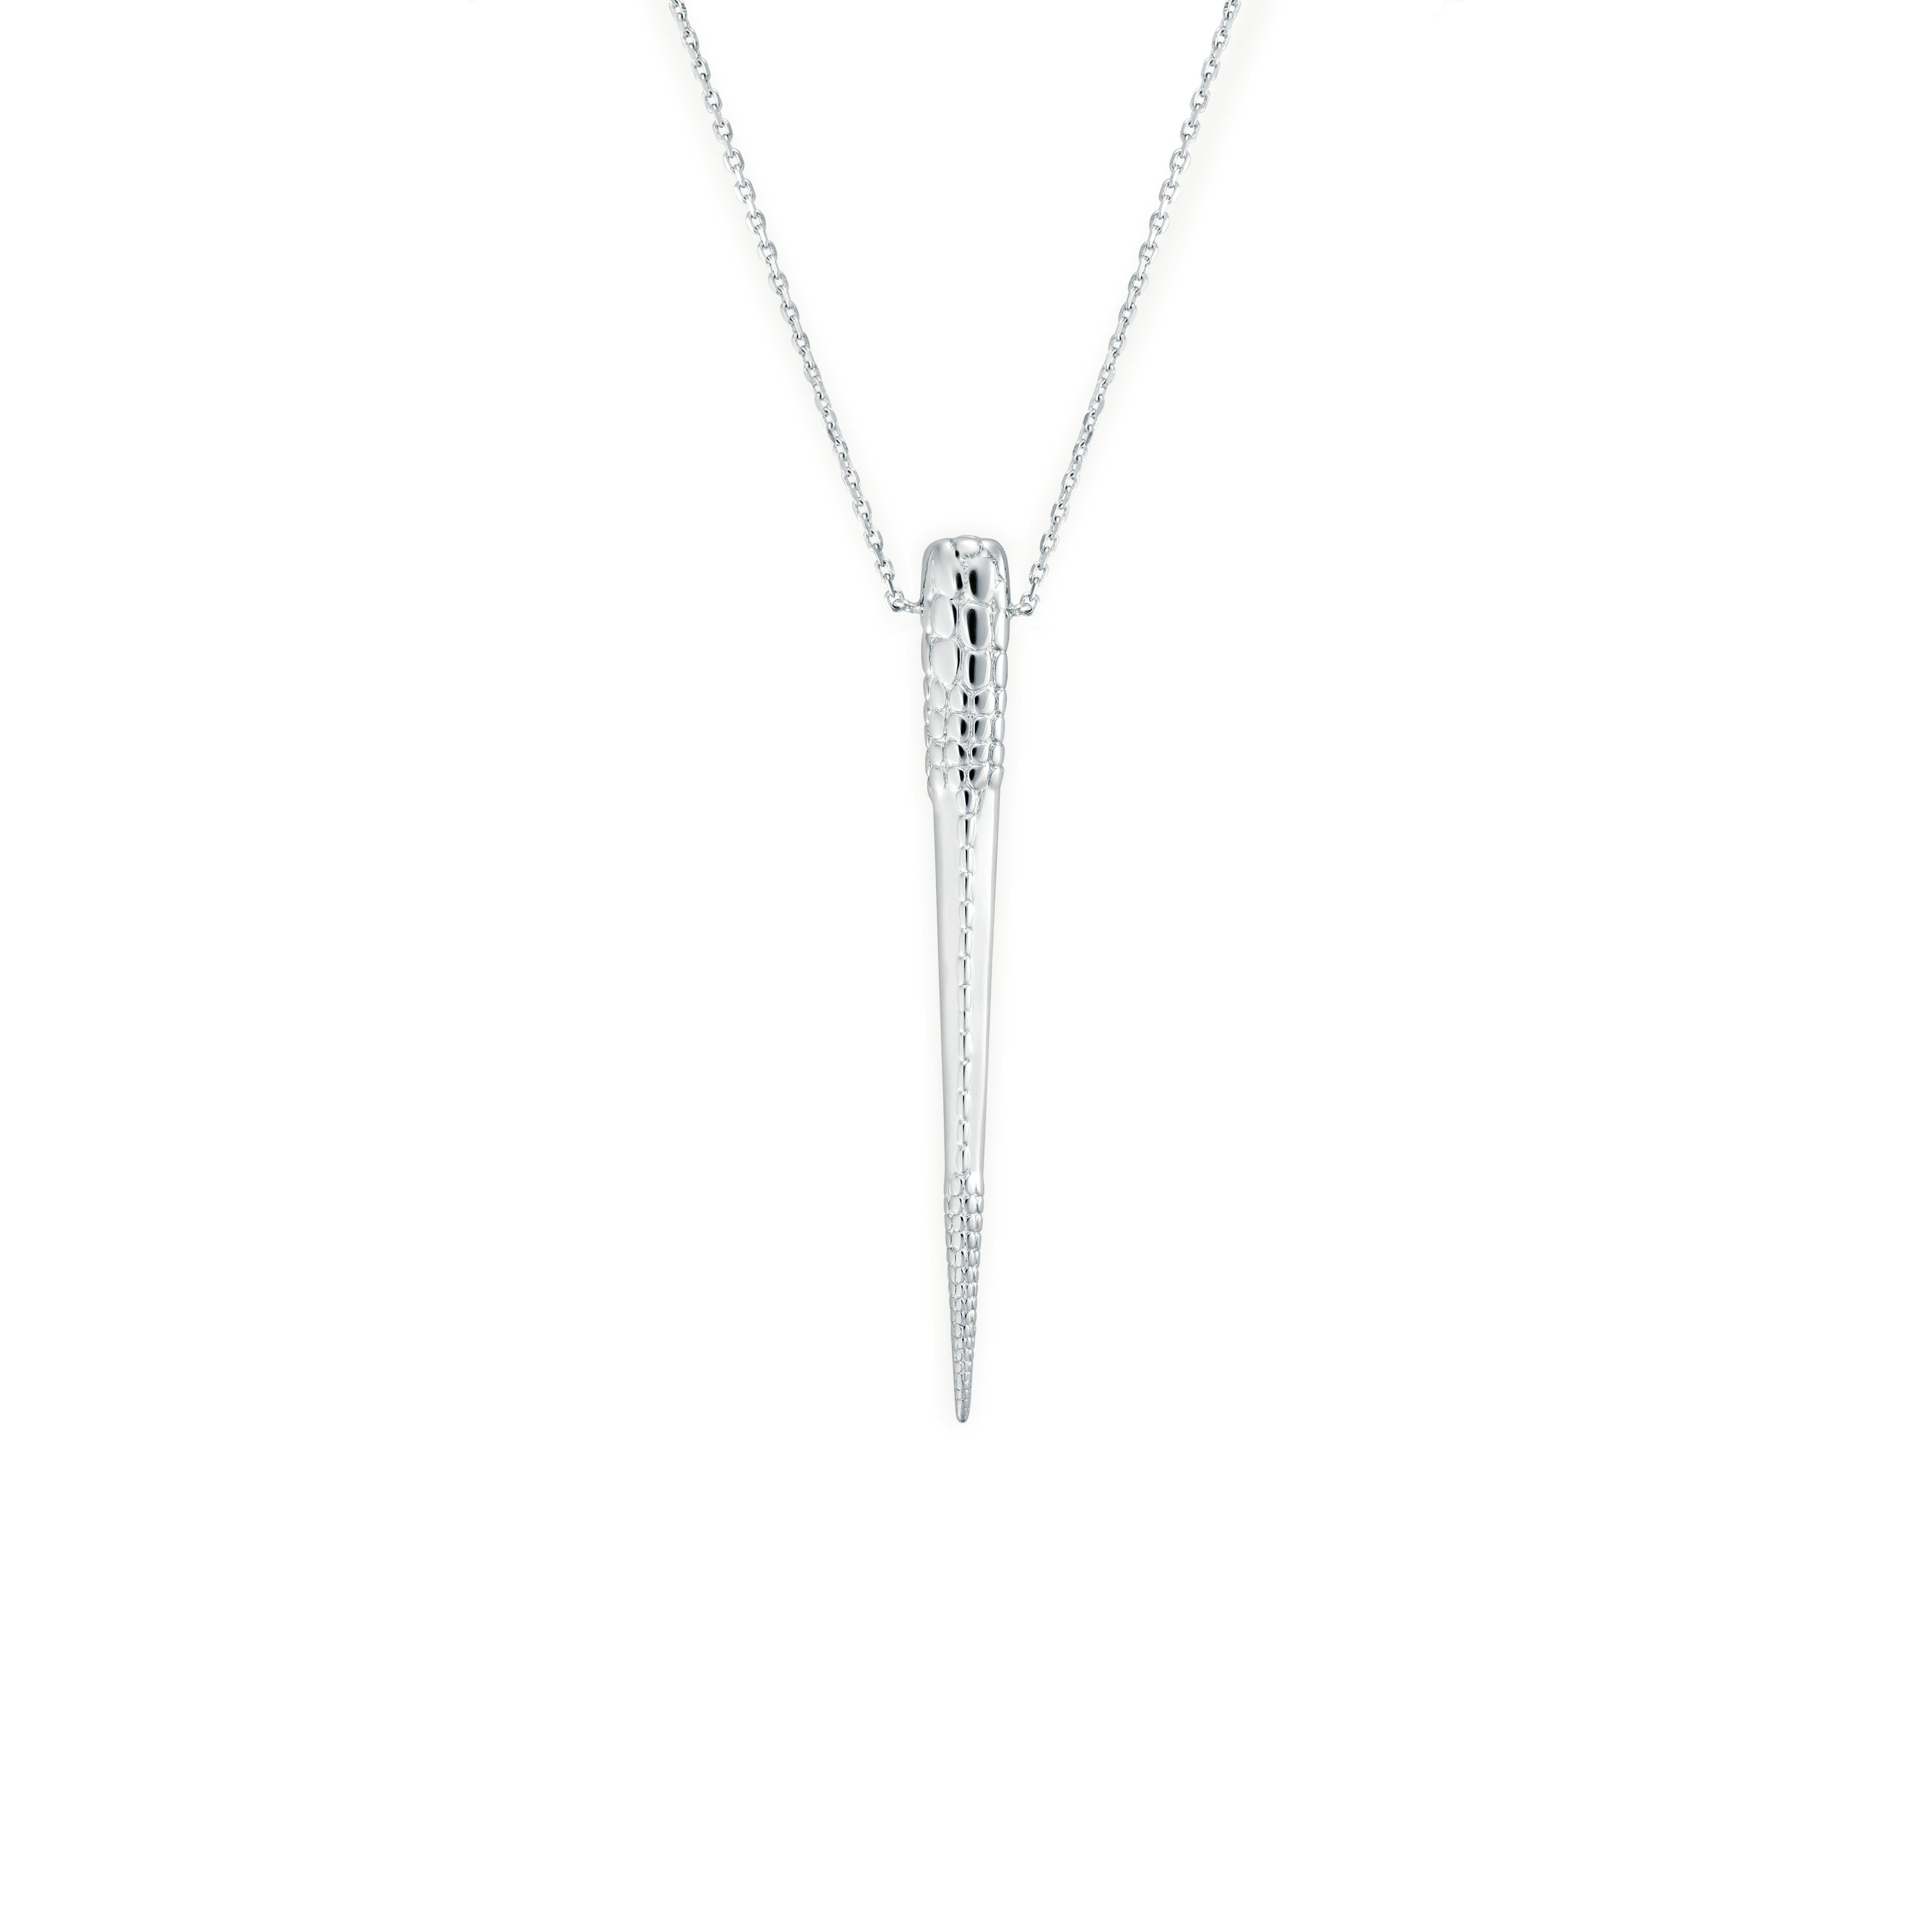 Sharp strong and effortless. Mistova;s silver croco long tooth necklace is a easy to wear beautifully crafted necklace. Made from highest quality silver with a crocodile skin texture on the highly polished surface makes this necklace a stand out. 